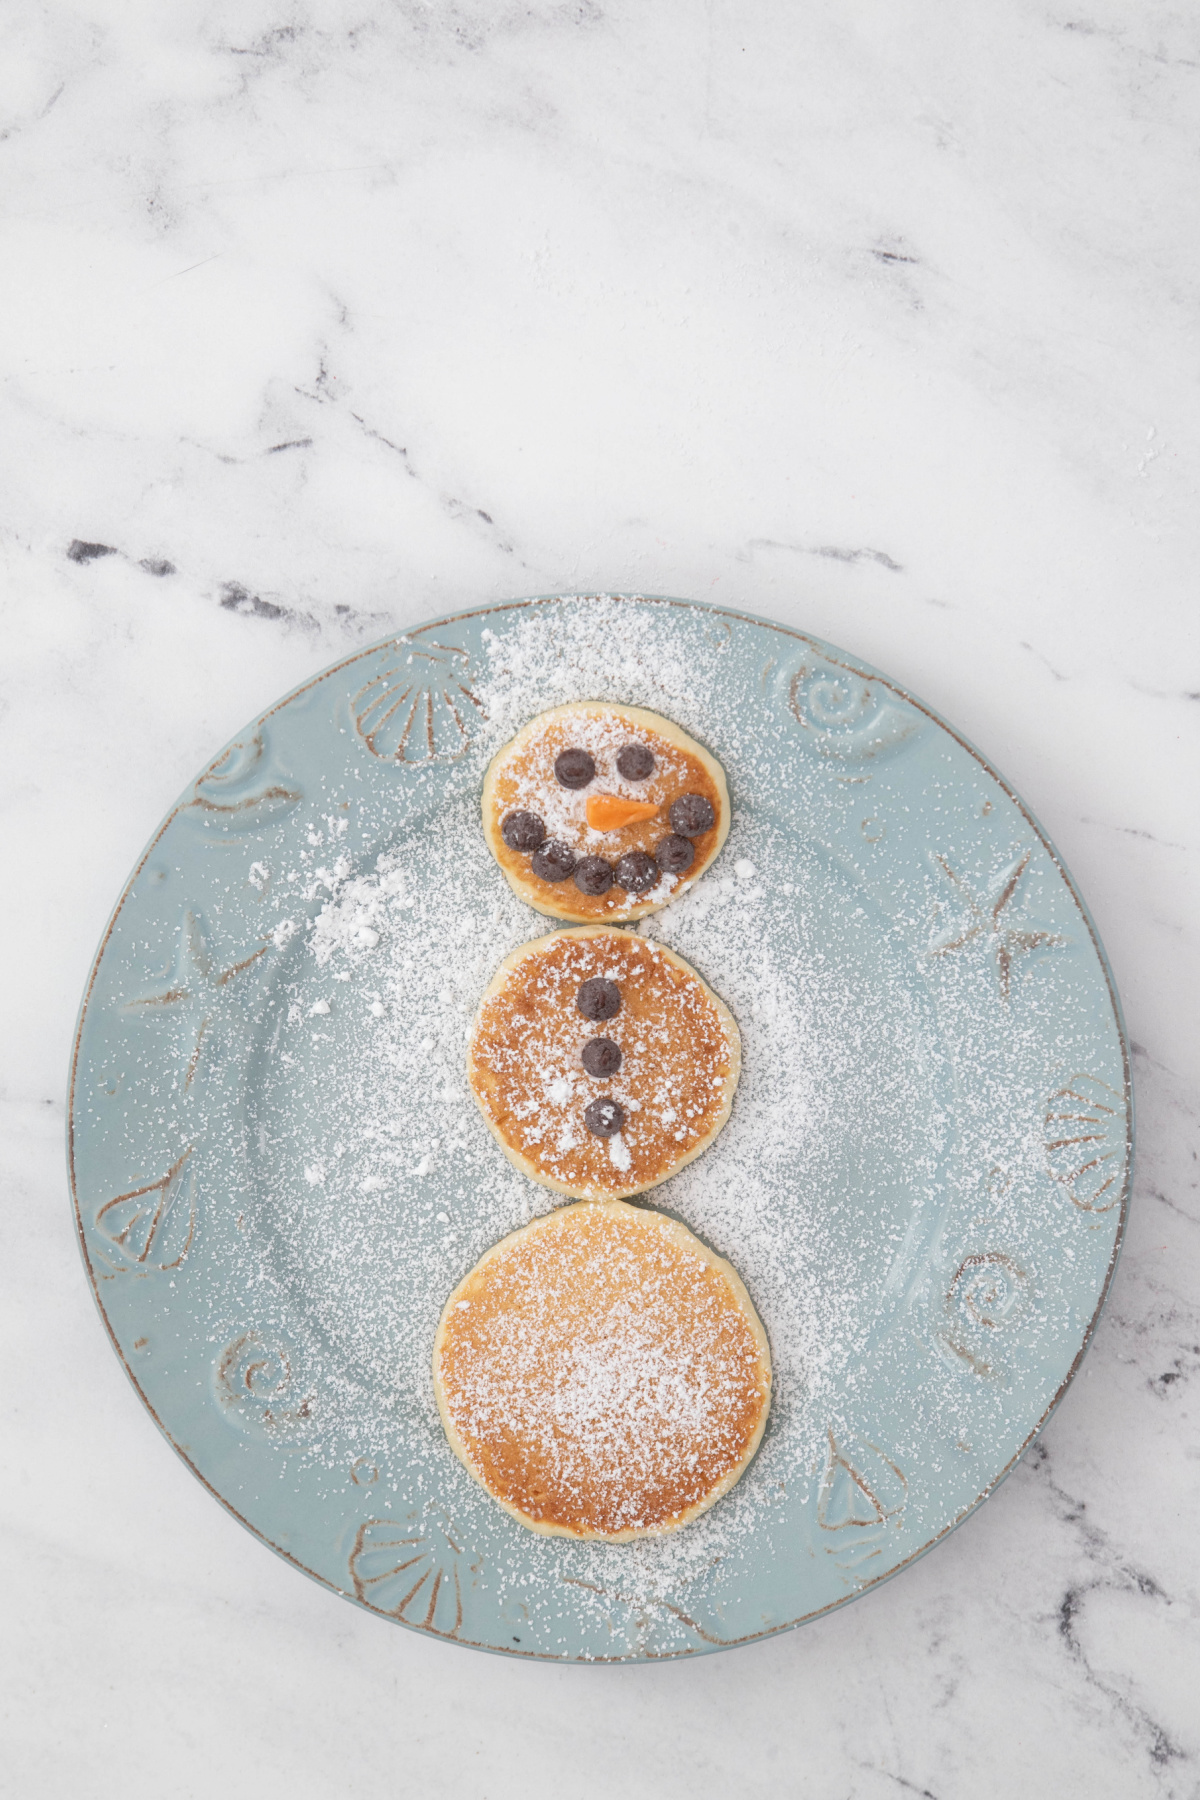 Snowman pancakes with Starburst nose on a plate with powdered sugar.